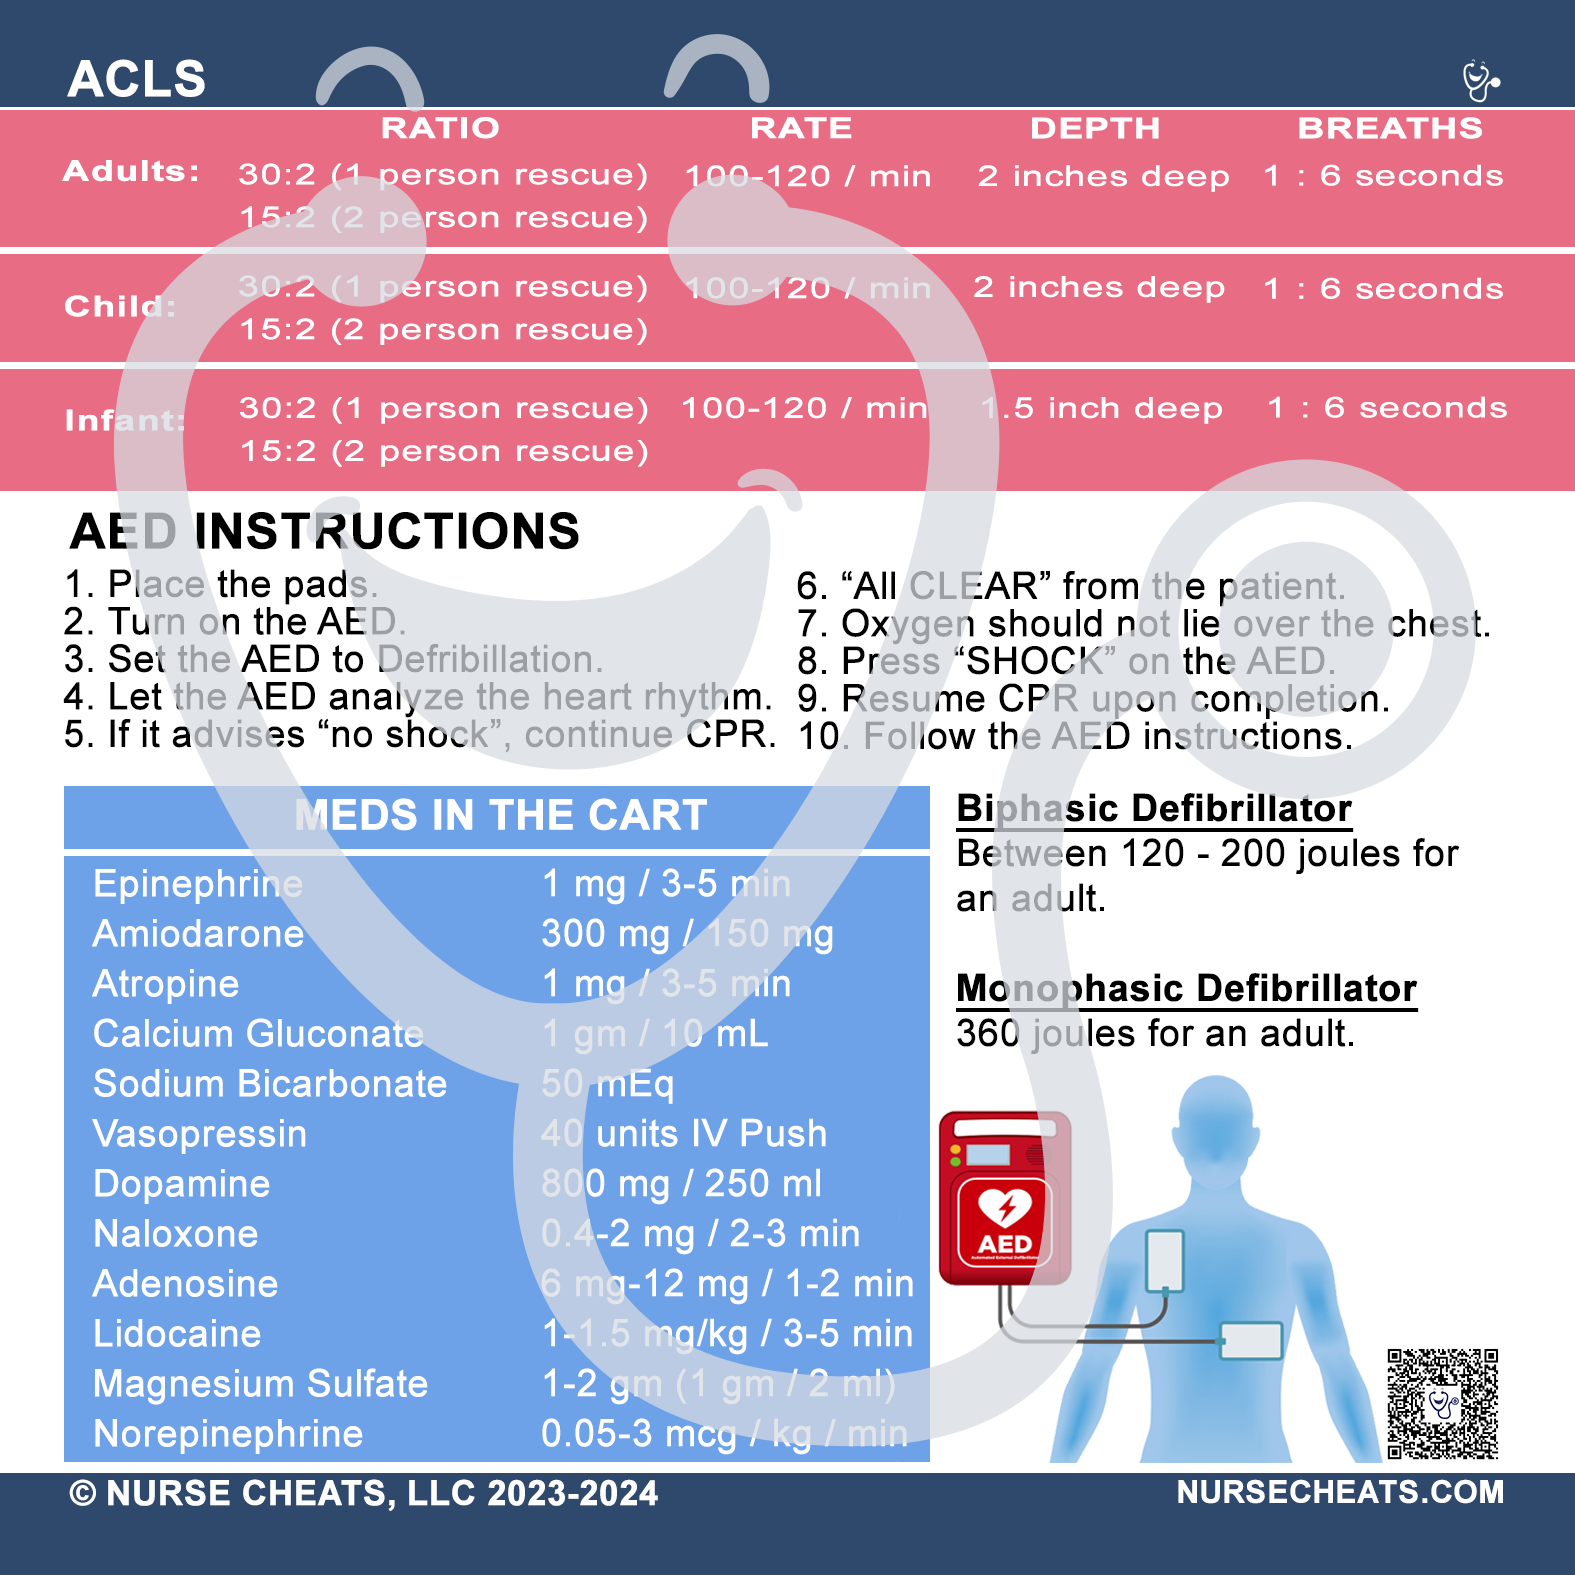 This badge is the algorithm for ACLS (Advanced Cardiovascular Life Support). It also contains emergency medication doses, CPR (cardiopulmonary resuscitation) ratios,&nbsp; AED (<span data-mce-fragment="1">Automated external defibrillator</span>) operation instructions, and joule settings. This is a MUST-HAVE for nurses.